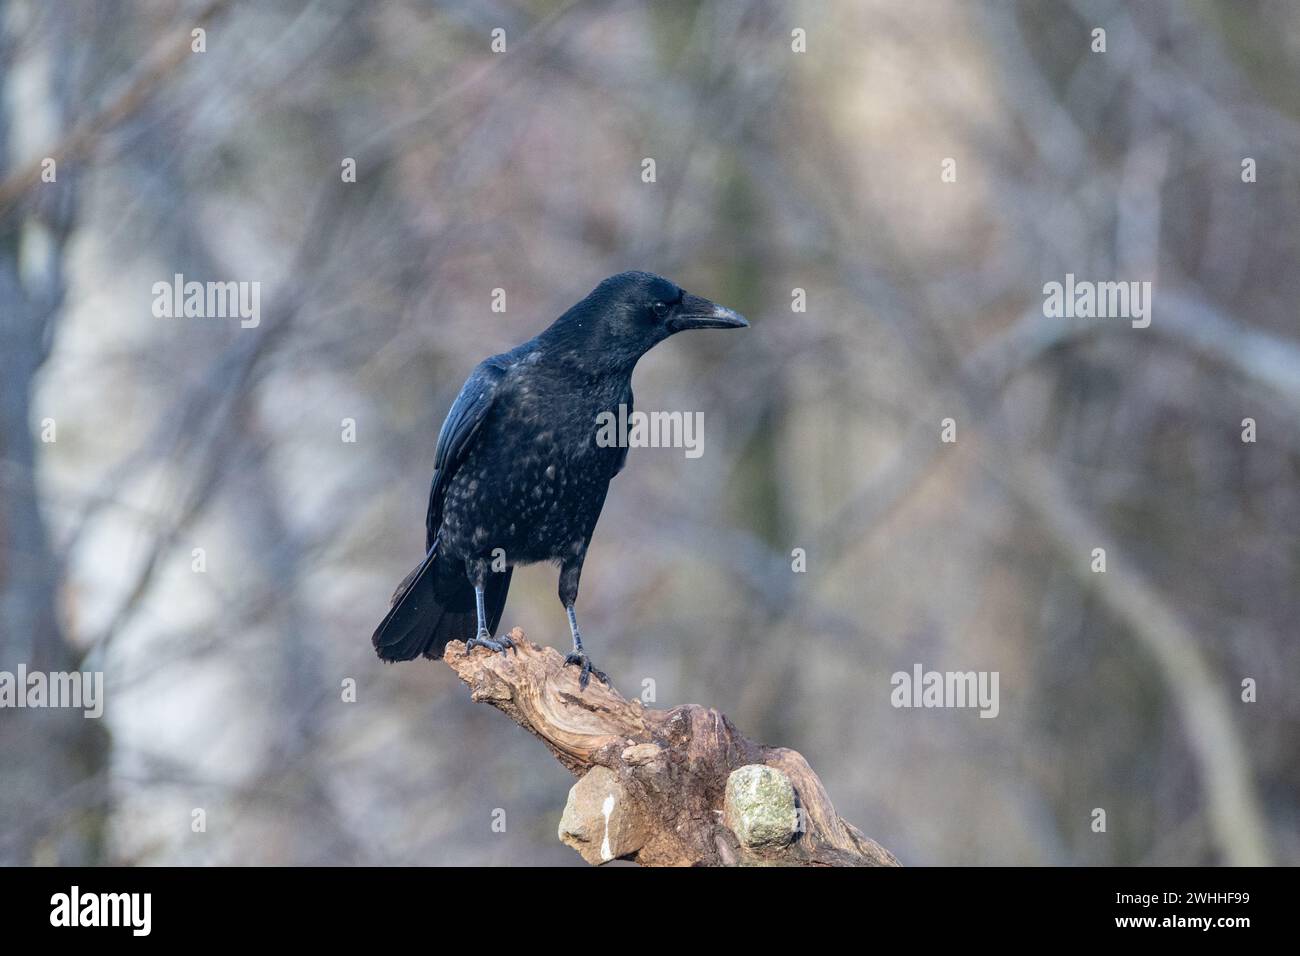 Carrion crow, (Corvus corone), perched on a tree stump, Insch, Aberdeenshire, Scotland, UK Stock Photo